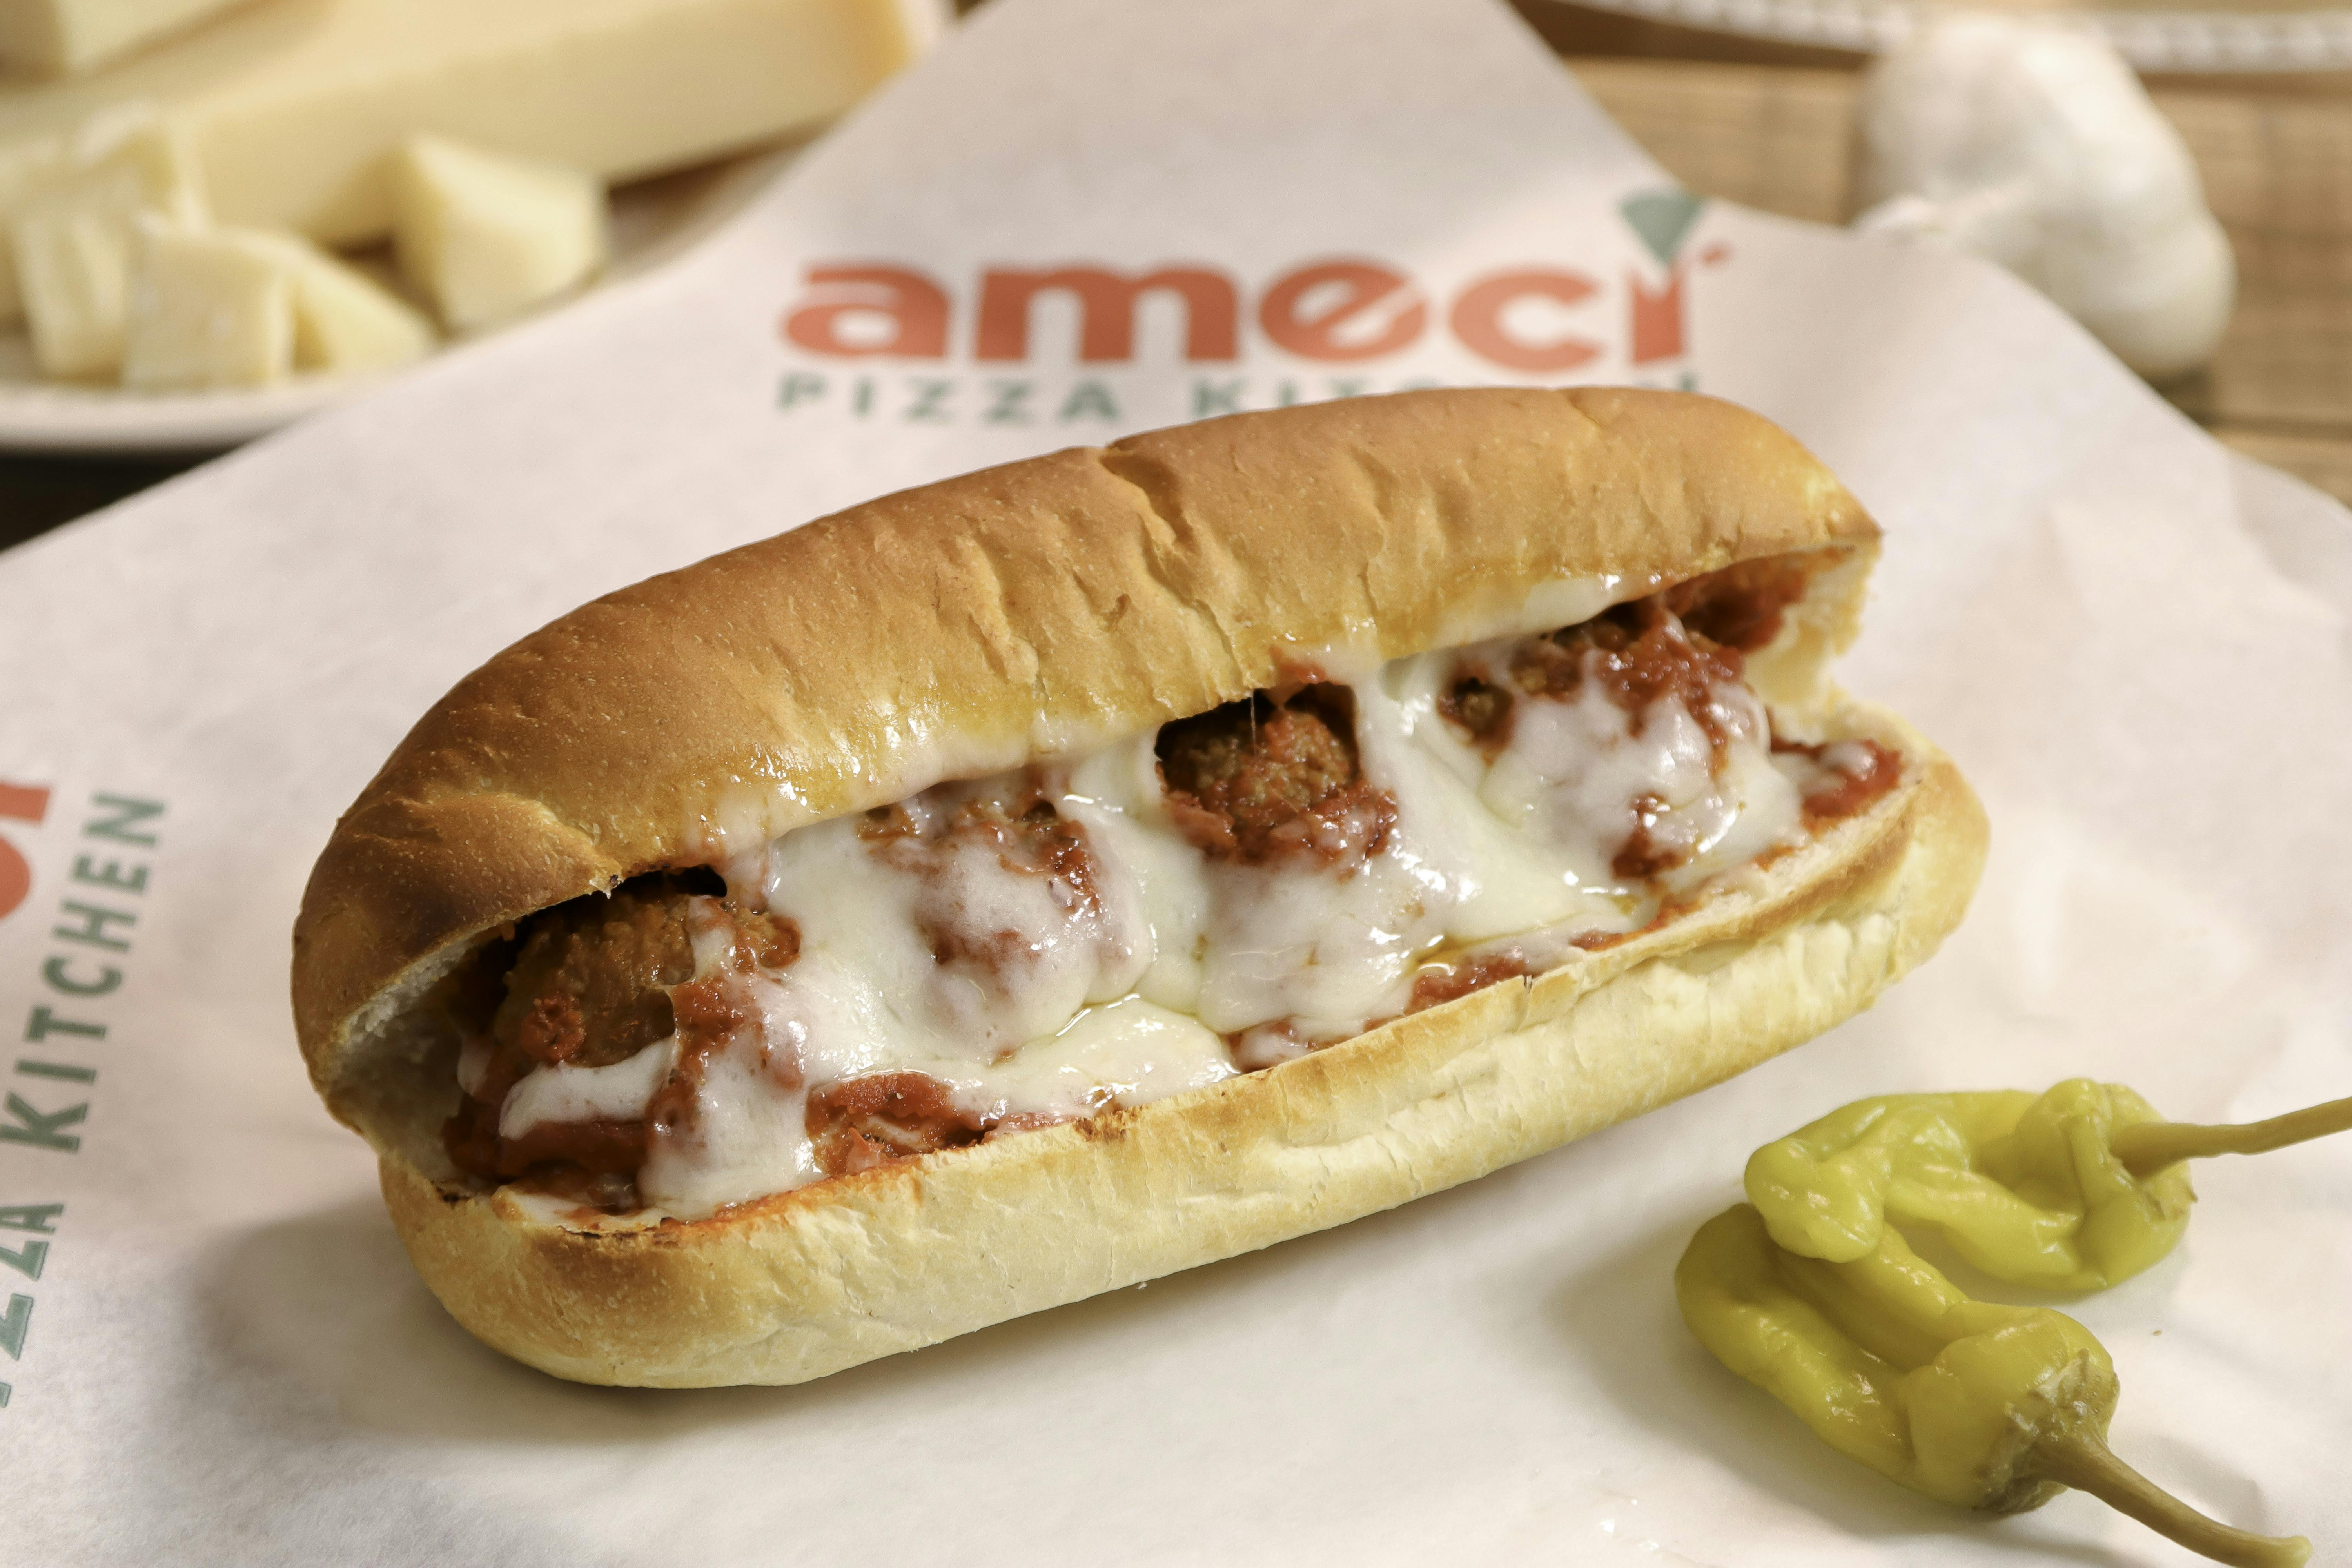 Meatball Sandwich with Cheese (Lunch) from Ameci Pizza & Pasta - Lake Forest in Lake Forest, CA